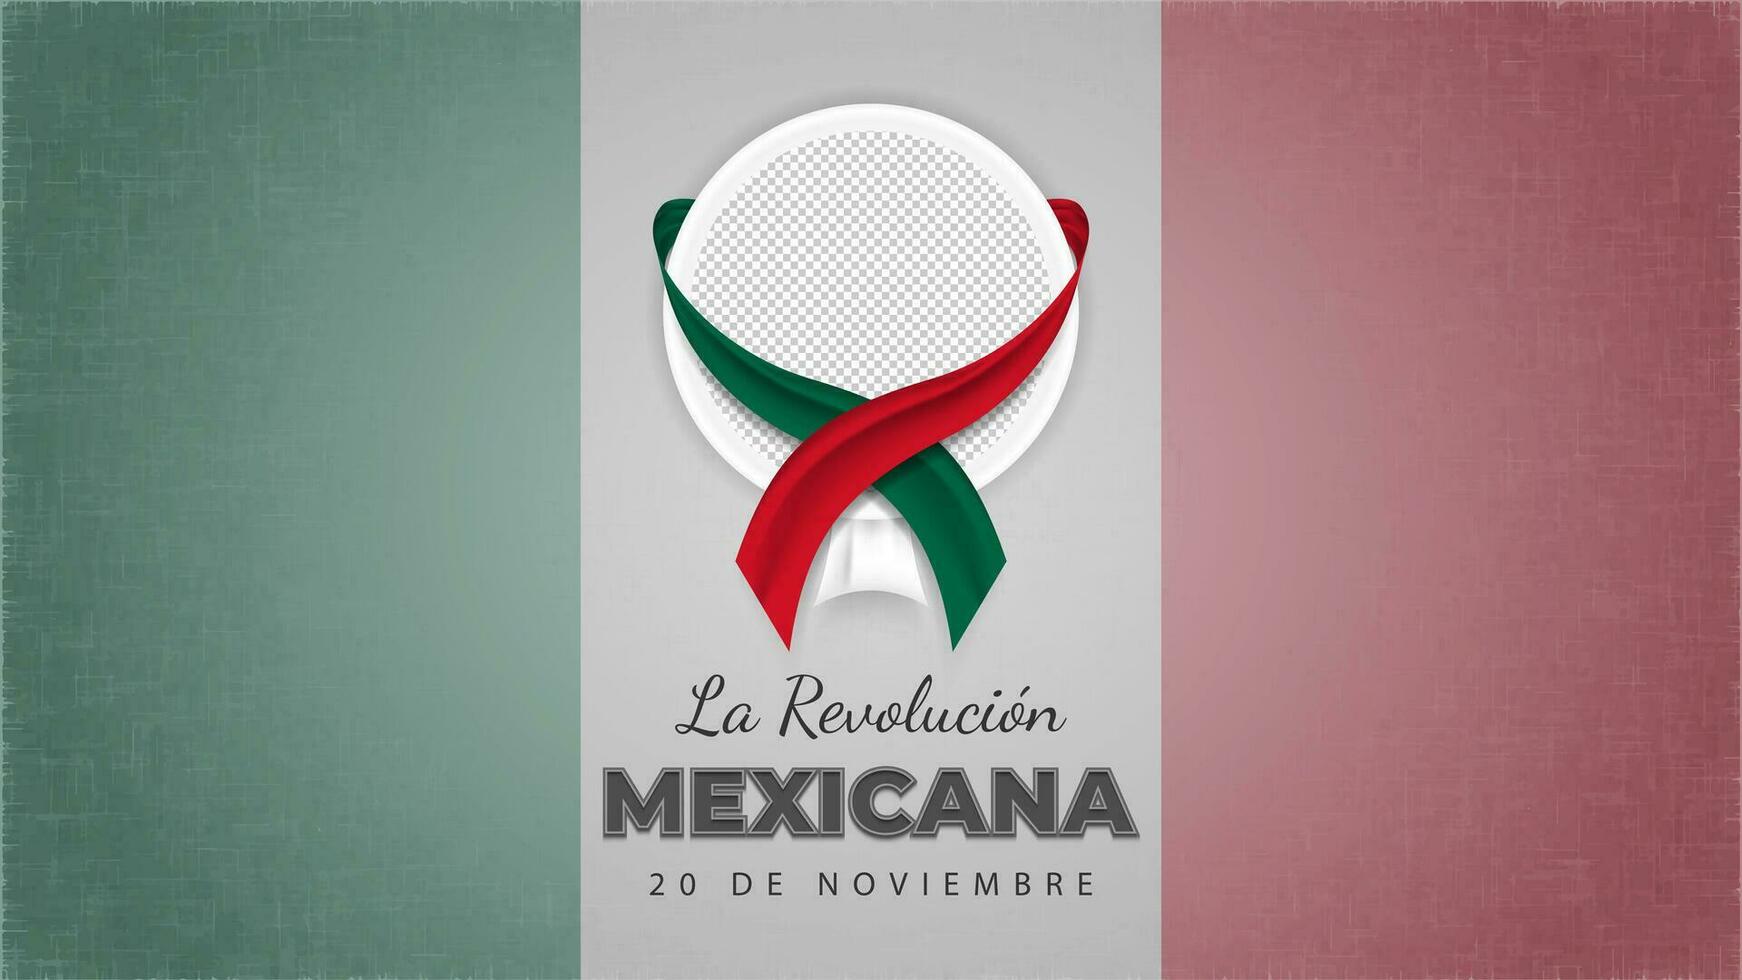 La Revolucion Mexicana Greeting on Grunge Flag Background  with Space for Picture and Tricolor Ribbons vector